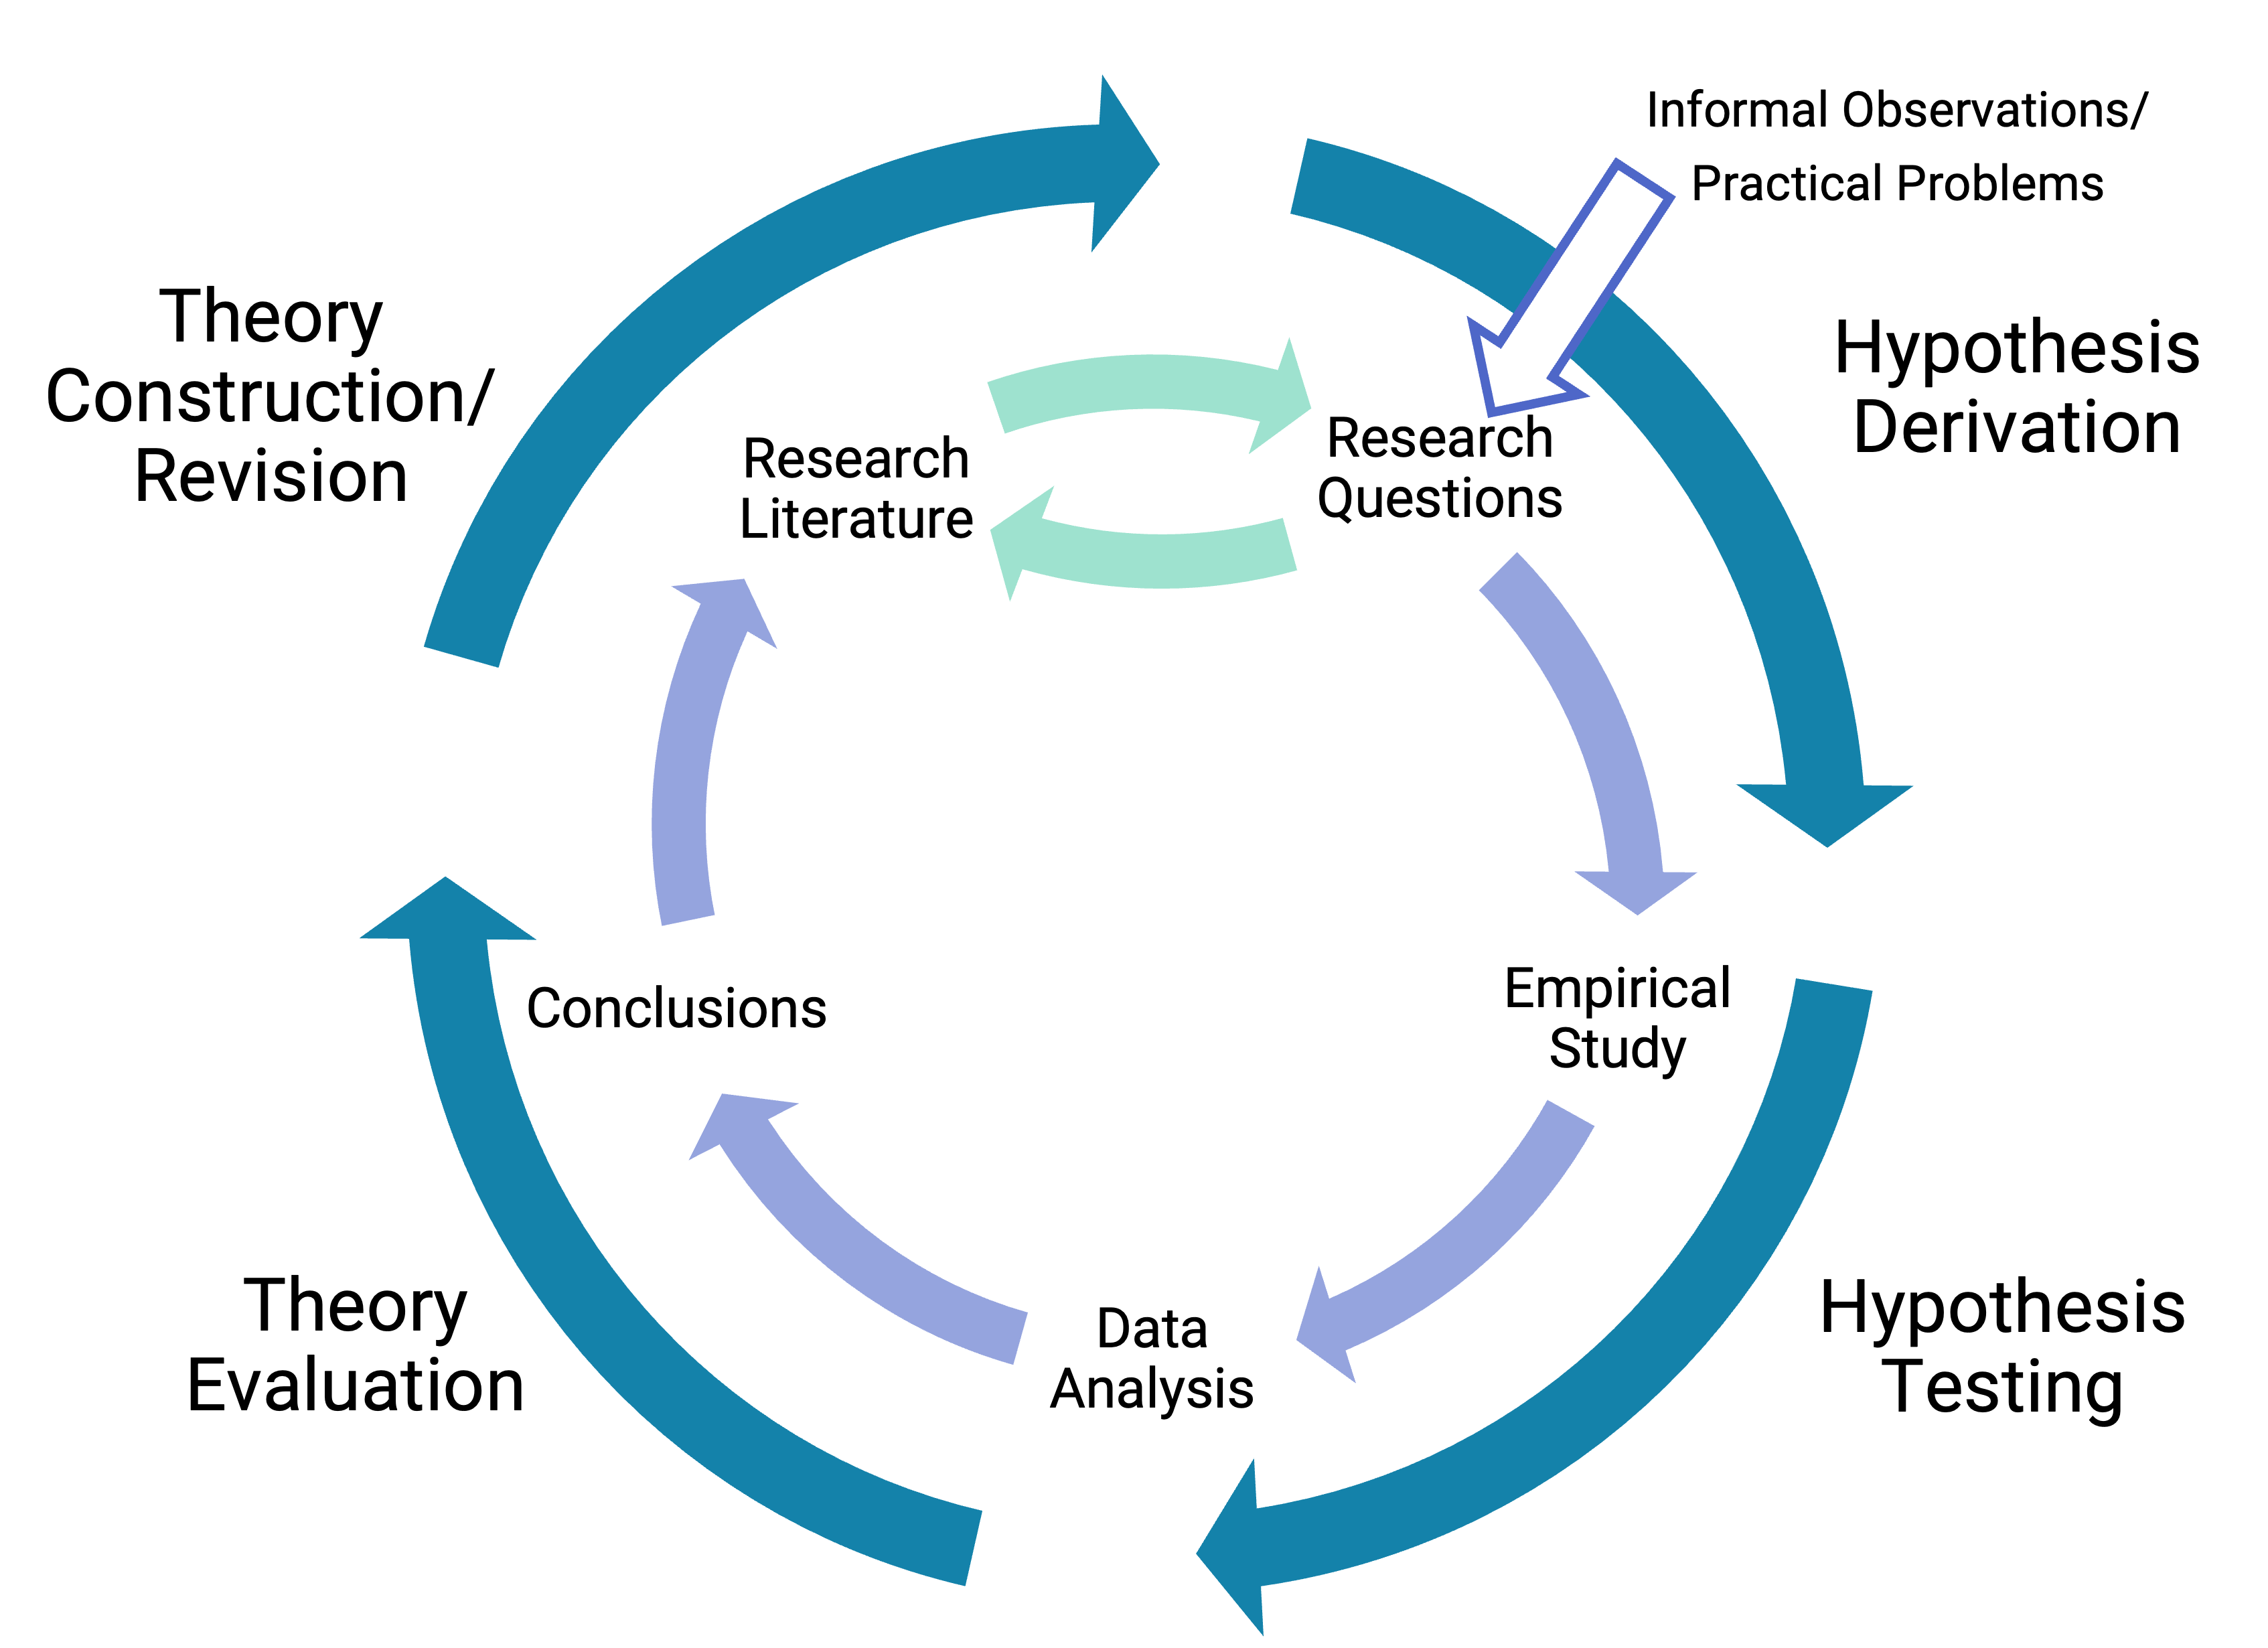 Hypothetico-deductive method combined with the general model of scientific research in psychology. Together they form a model of theoretically motivated research.